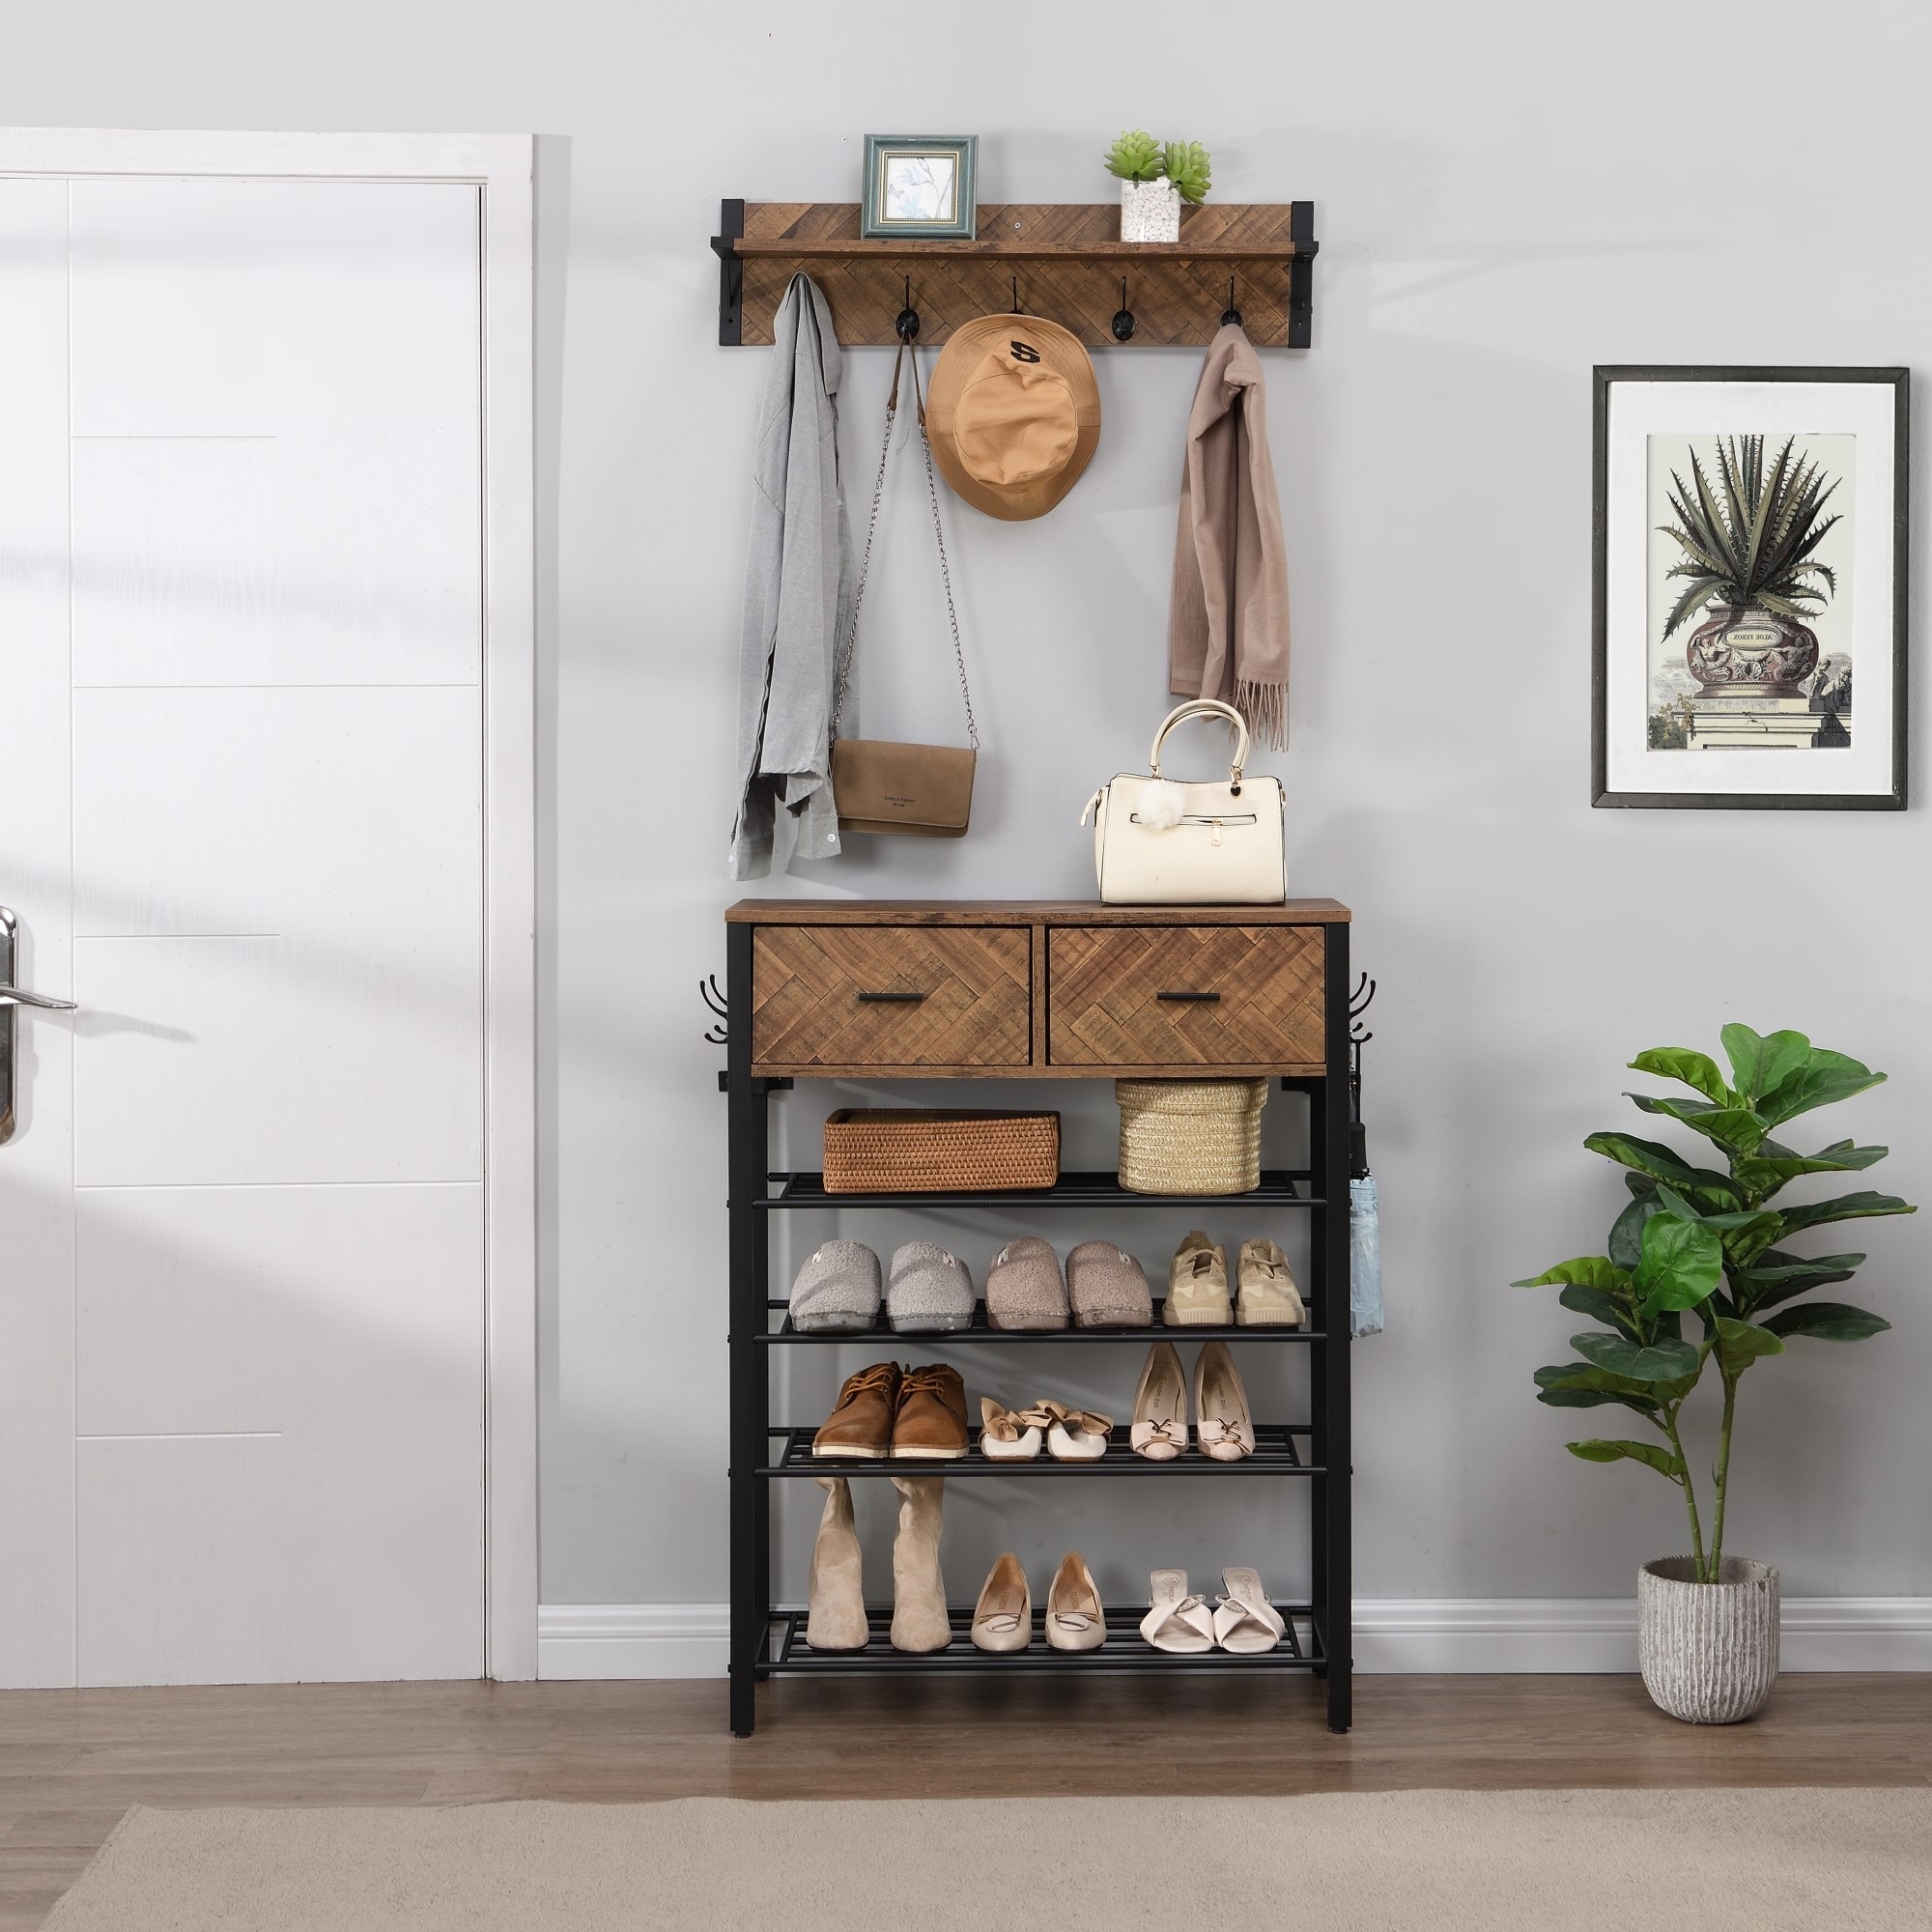 https://ak1.ostkcdn.com/images/products/is/images/direct/50120a8a94e0928c1ef9ecd36224dd930a3baba5/Entryway-4-tier-Shoe-Rack-with-Hall-Tree%2C-One-Set-Entryway-Show-Rack-with-Storage-and-Hooks.jpg